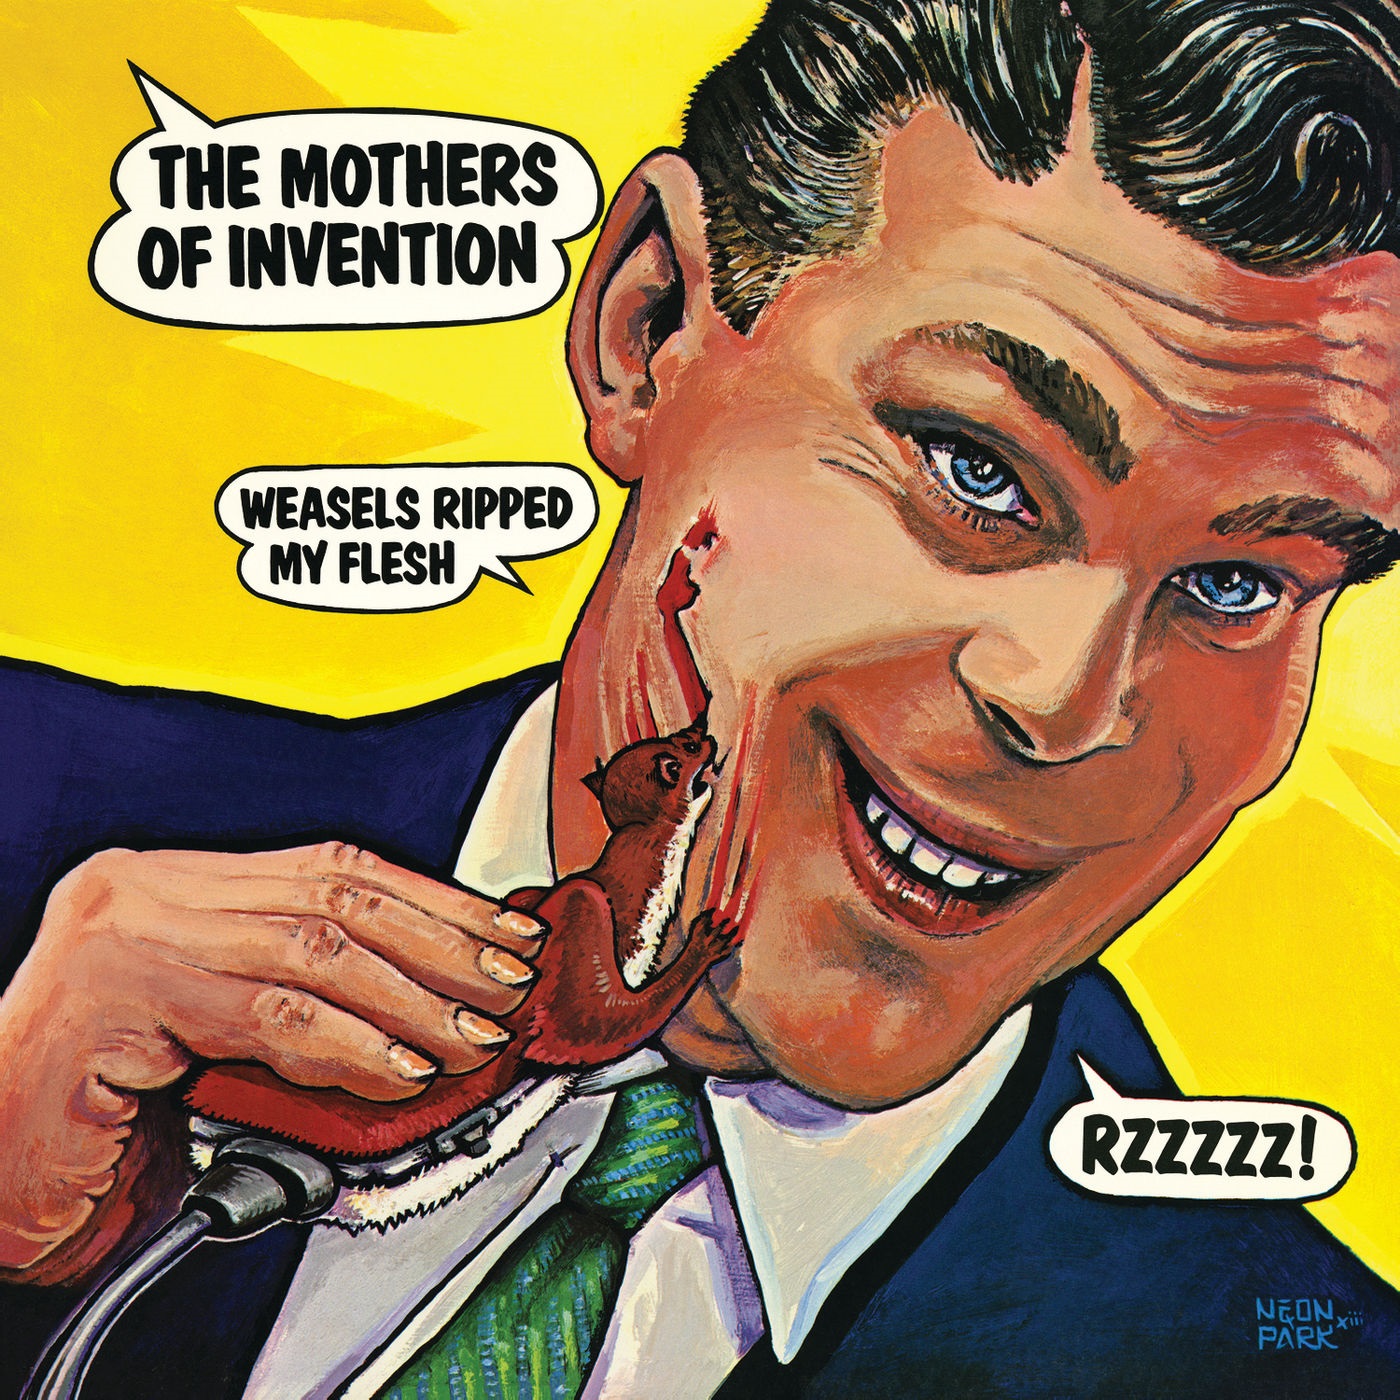 Frank Zappa & The Mothers of Invention – Weasels Ripped My Flesh (1970/2021) [FLAC 24bit/192kHz]